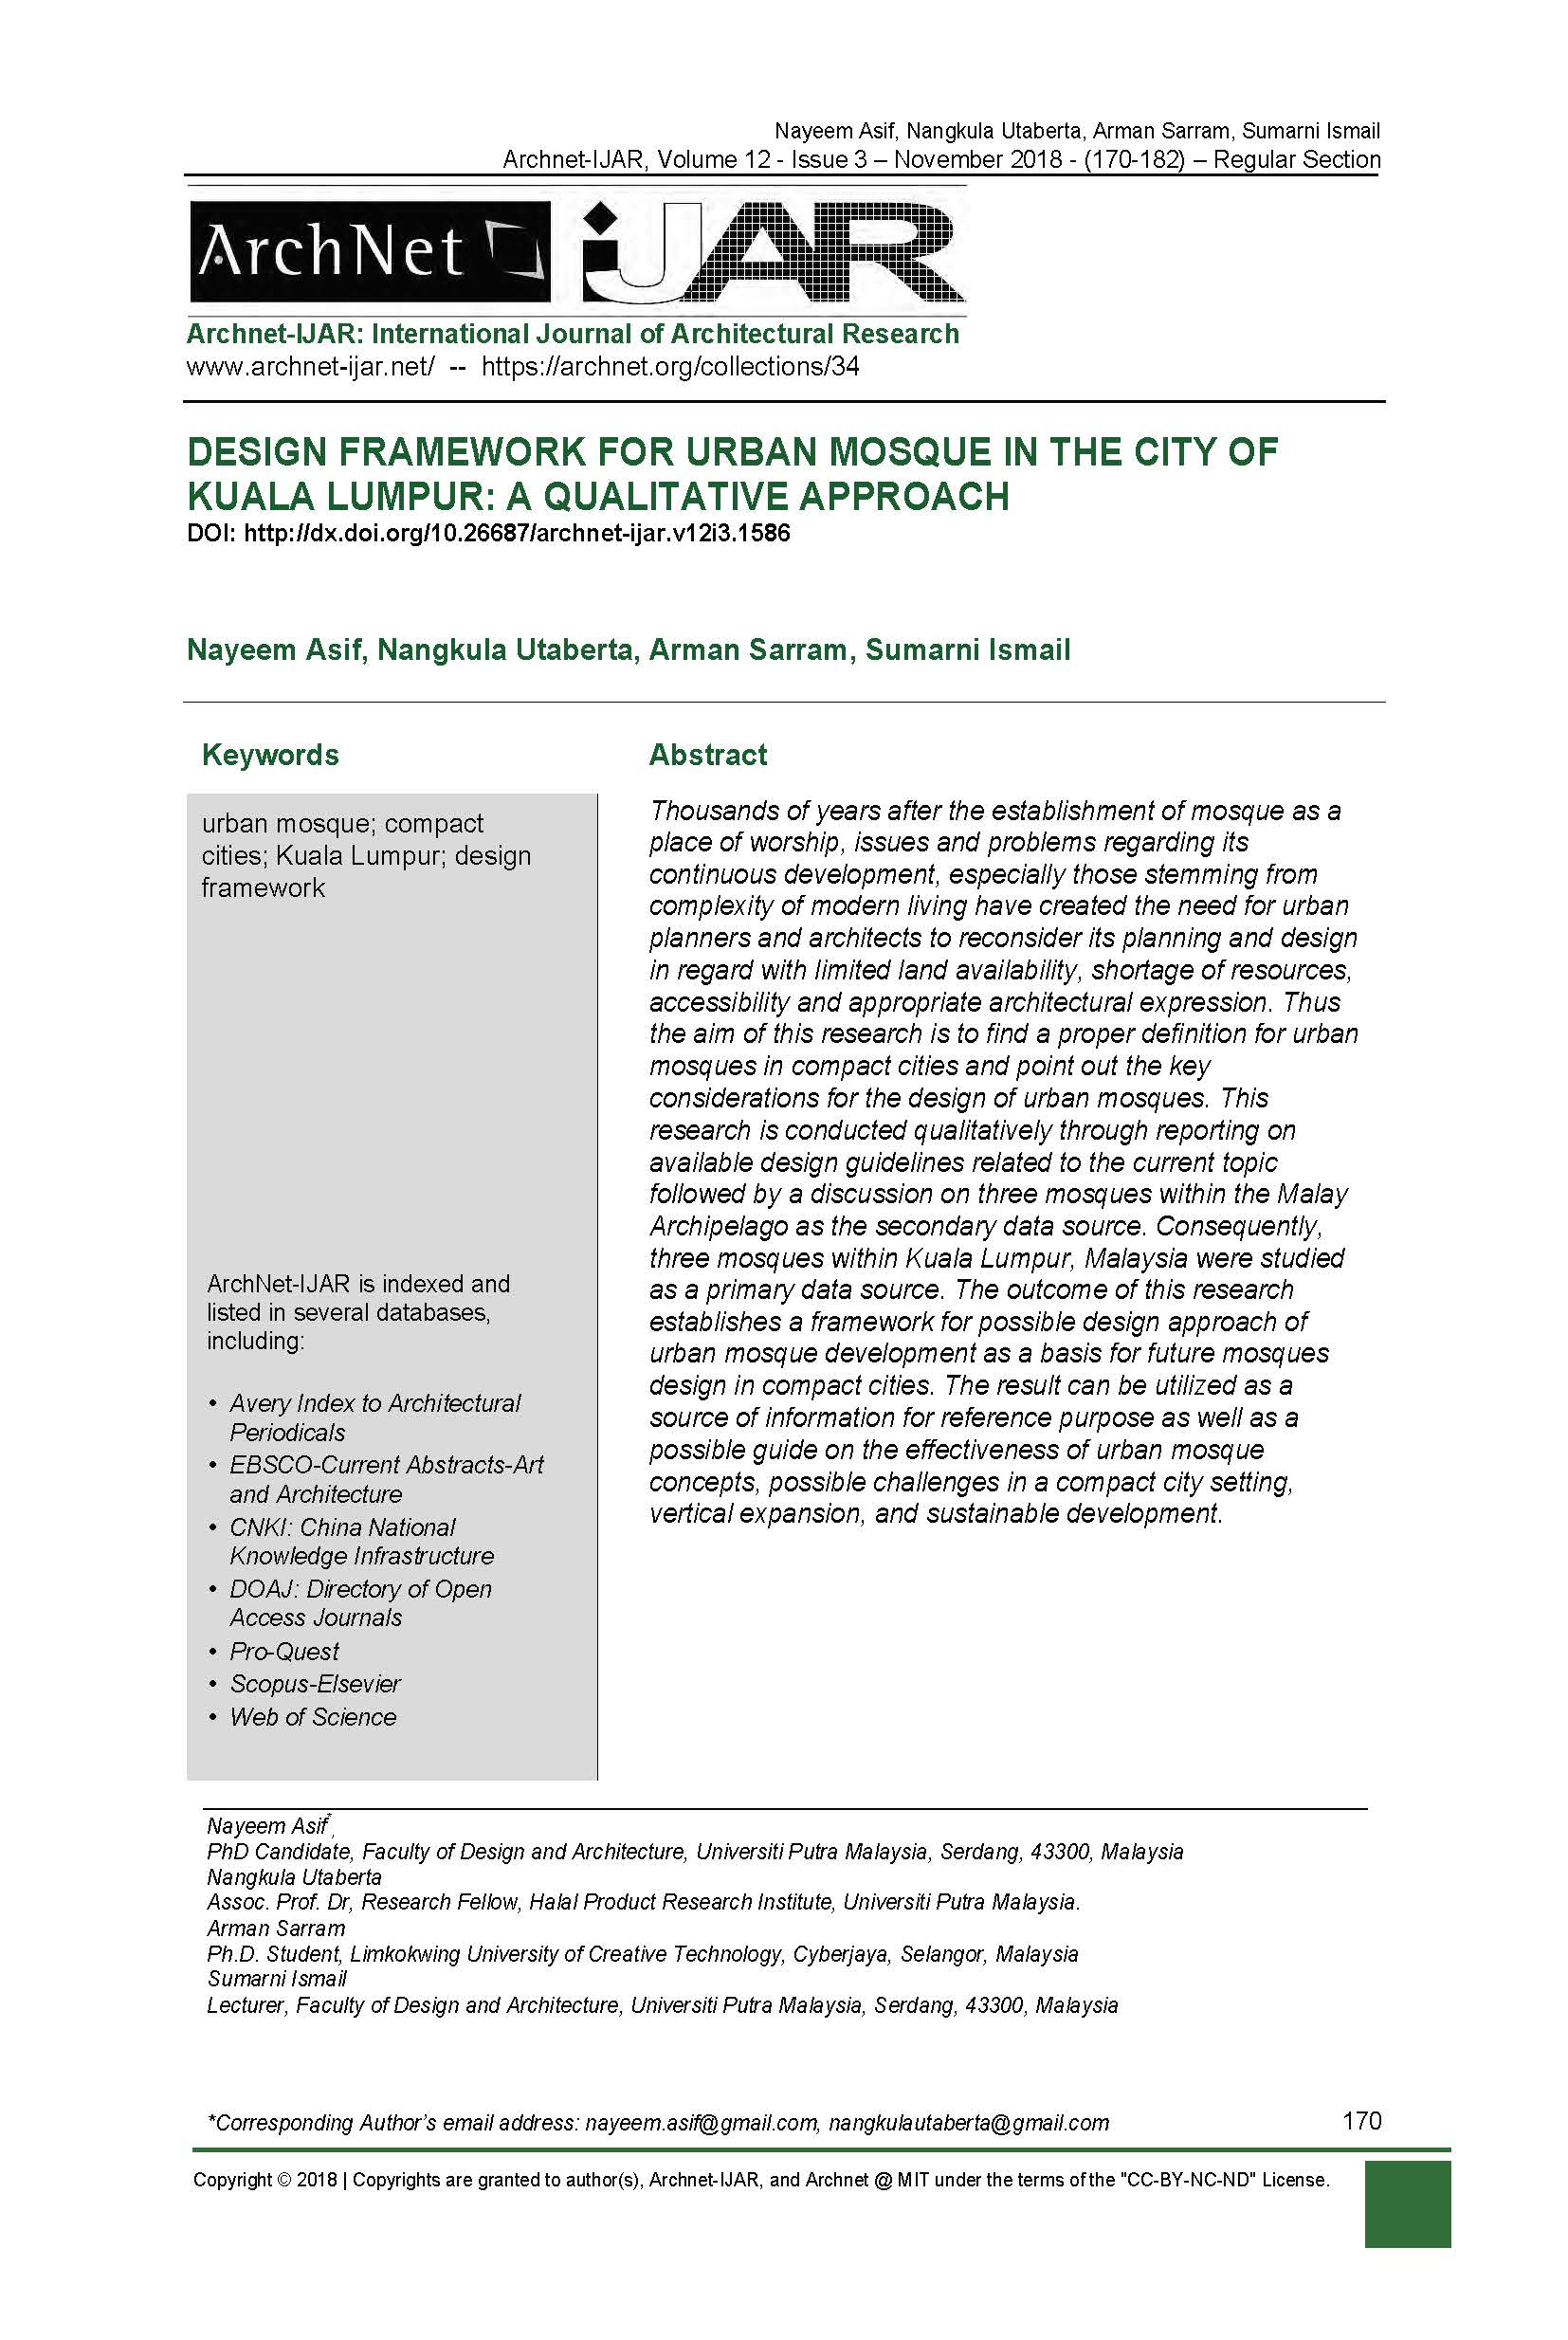 Design Framework for Urban Mosque in the City of Kuala Lumpur: A Qualitative Approach